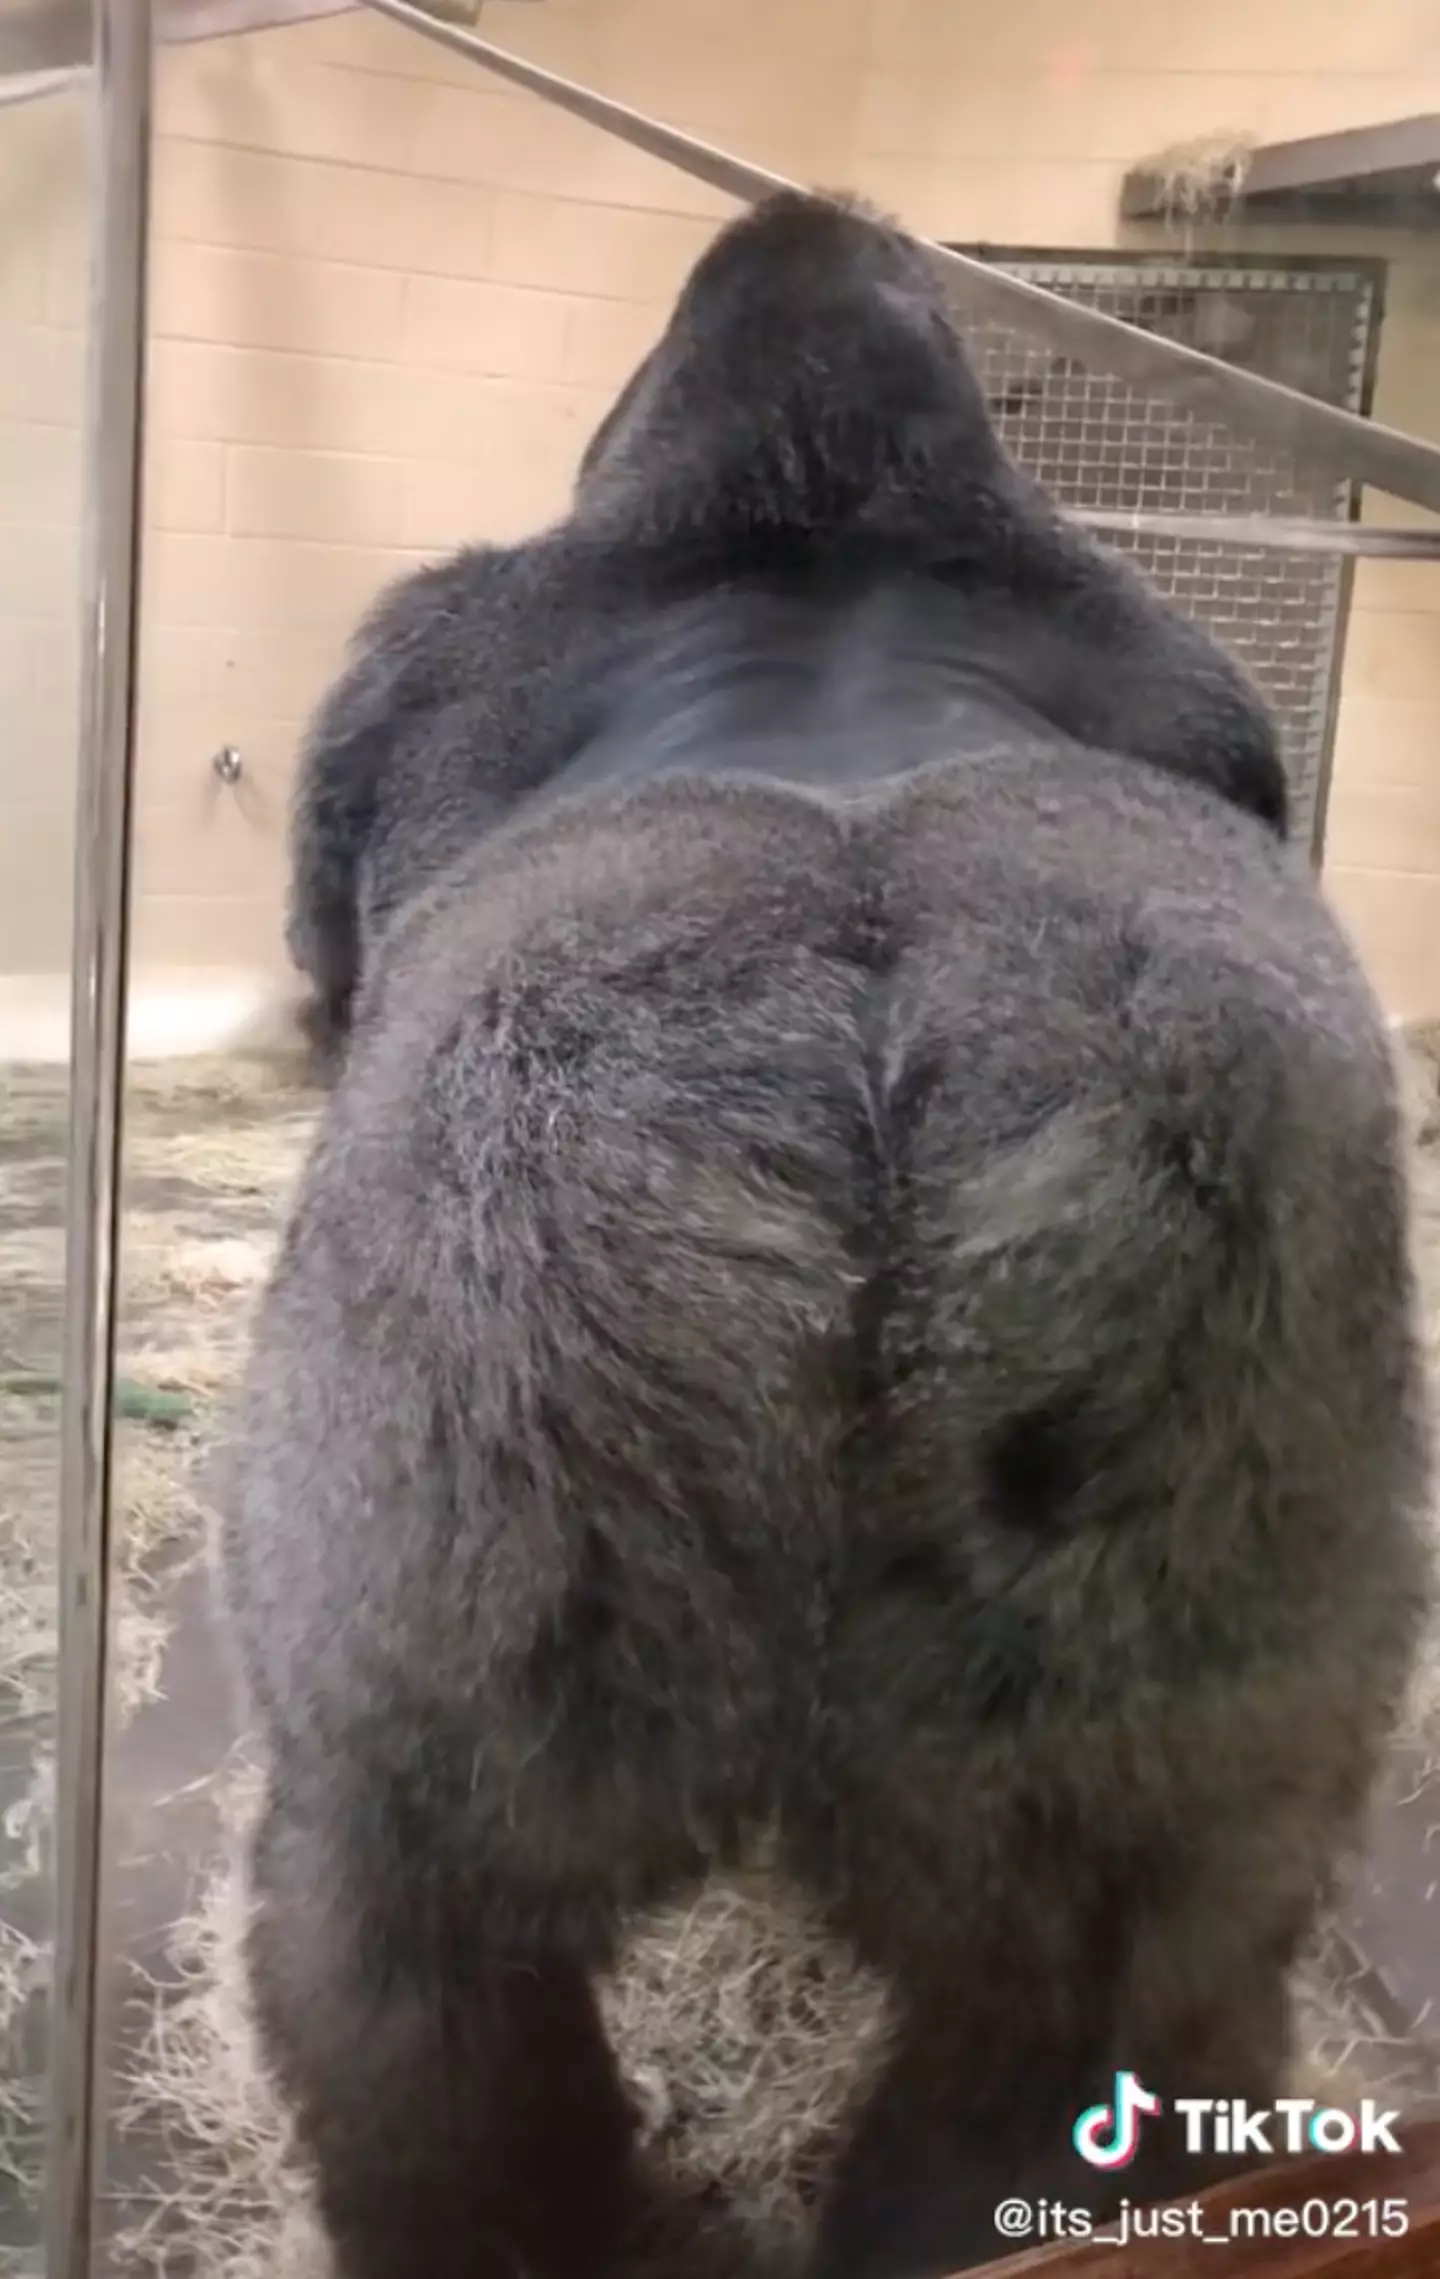 There aren't many people in this world who can say they've been mooned by a gorilla.